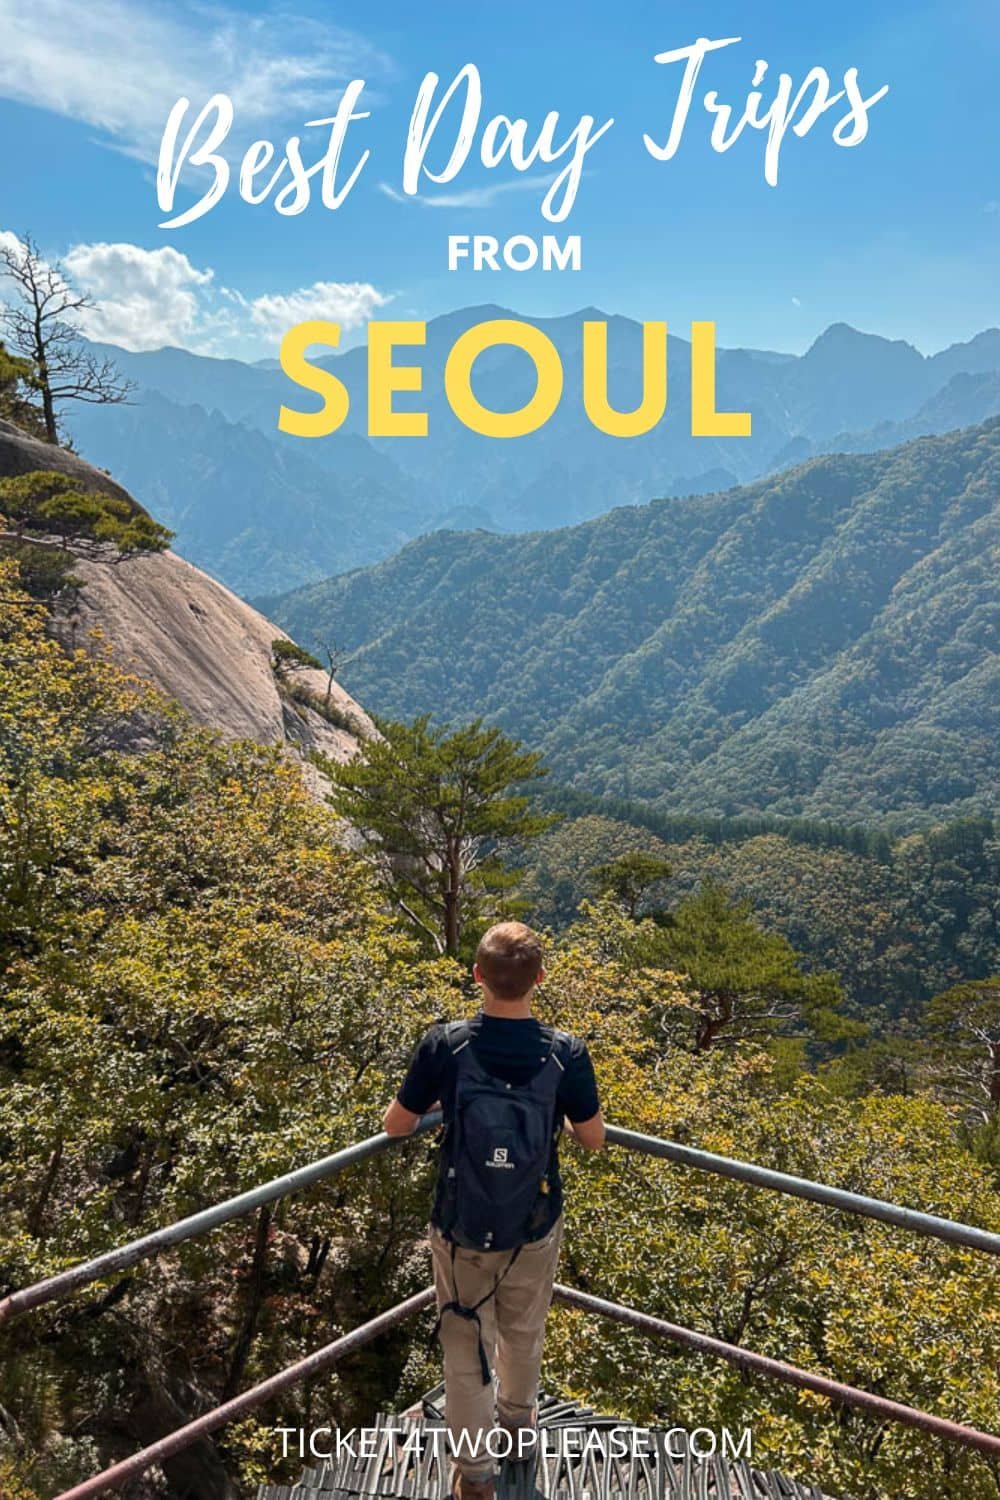 Best Day trips from Seoul - South Korea